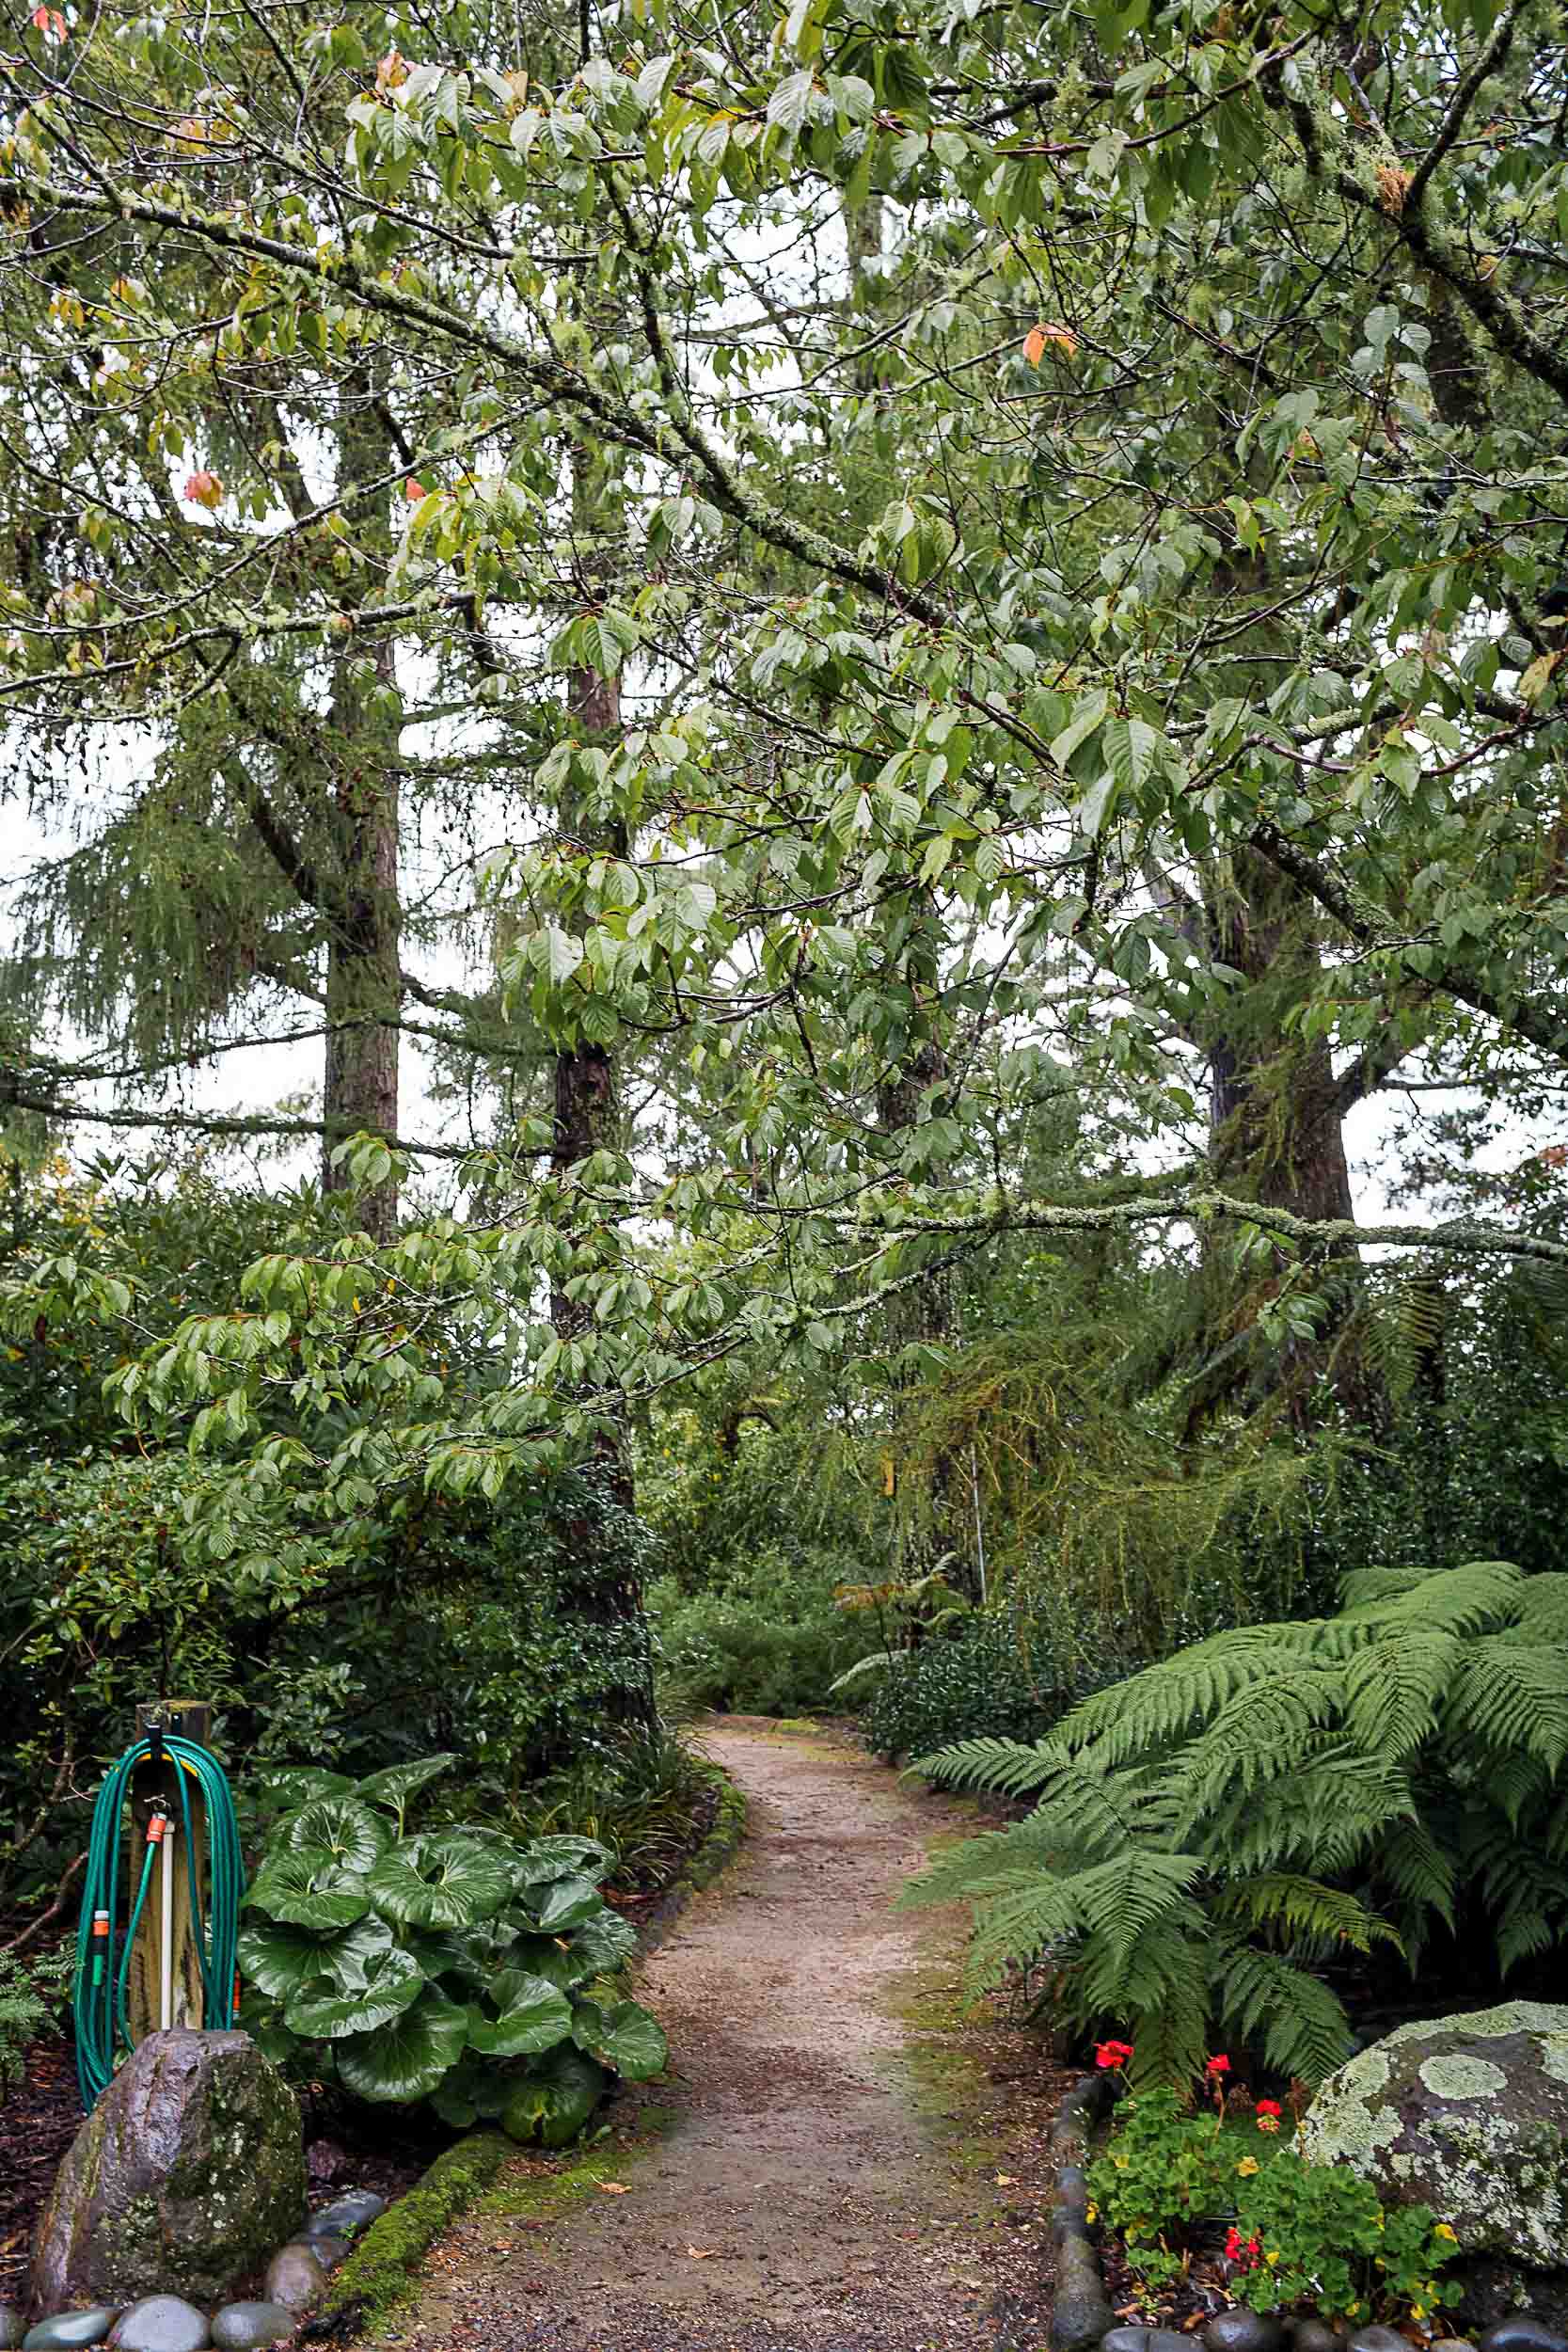 If you are planning to hike the Tongariro Alpine Crossing, consider staying in the woods at Creel Lodge in Turangi the night before